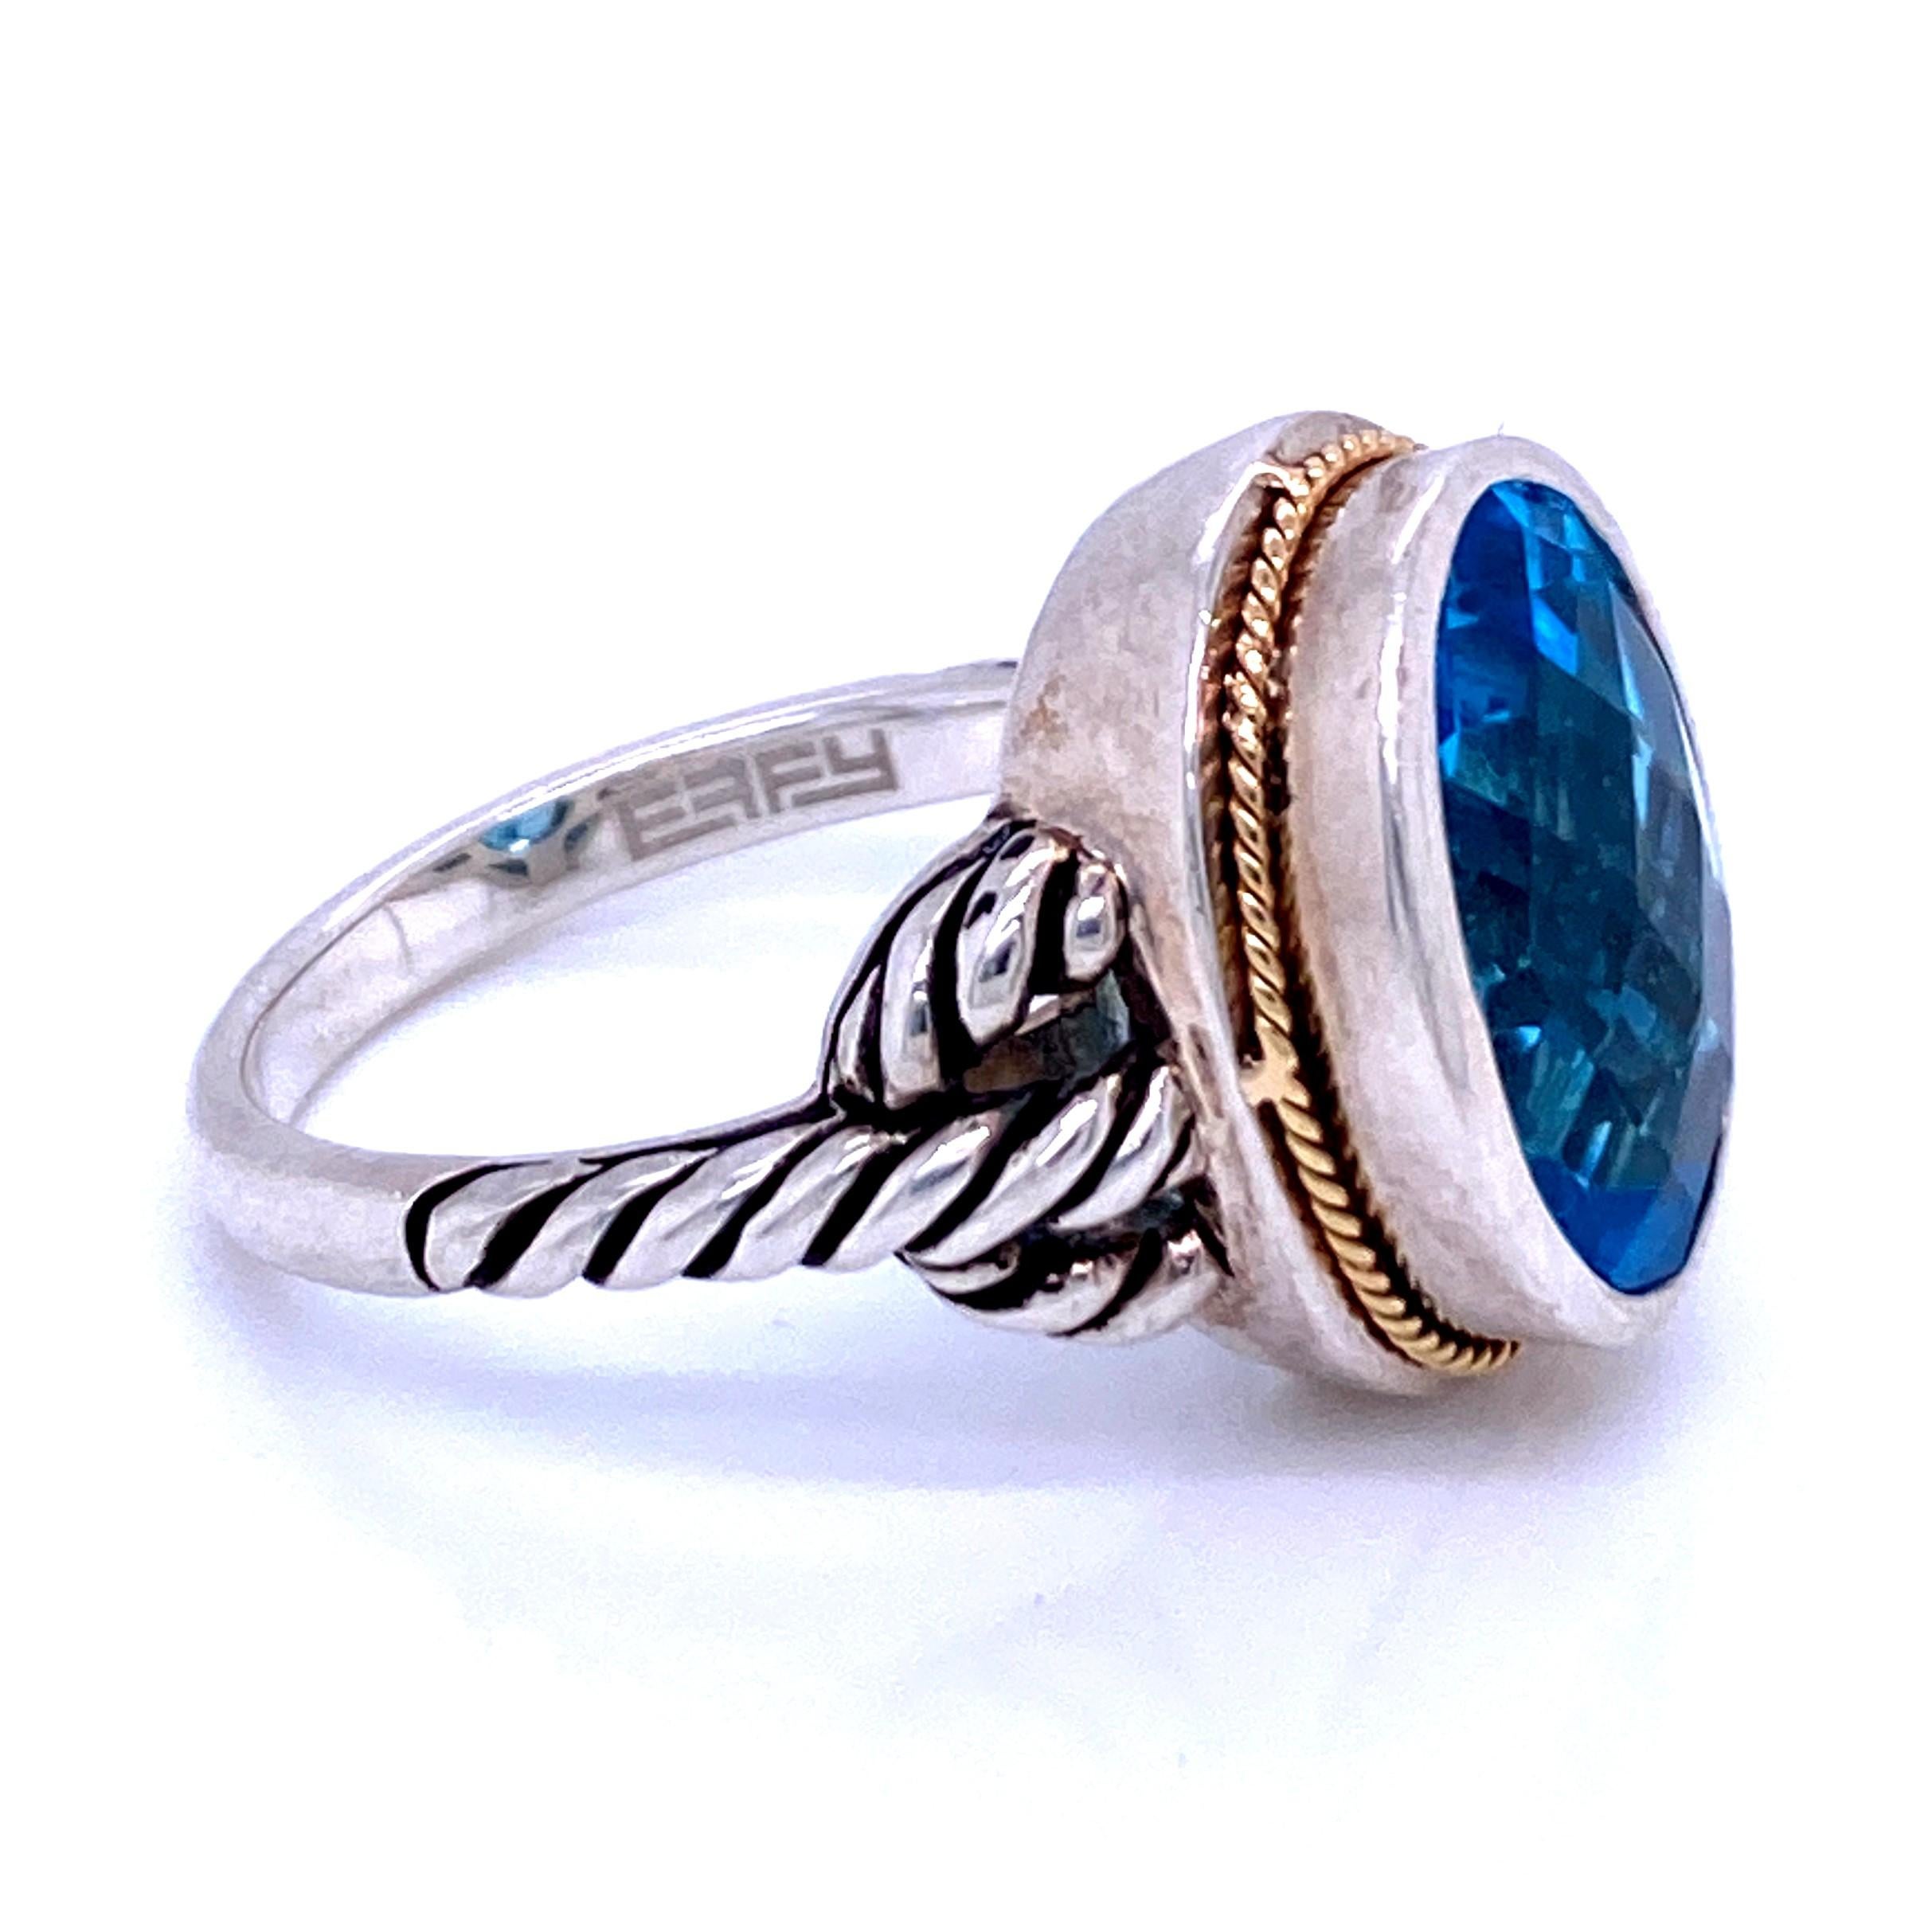 One sterling silver and 18 karat yellow gold (stamped 18K 925 EFFY) ring set with one 14 x 10mm oval blue topaz set in a silver bezel with 18 karat yellow gold edge rope design on the shoulders.  The shank measures 2.2mm near the top of the ring and